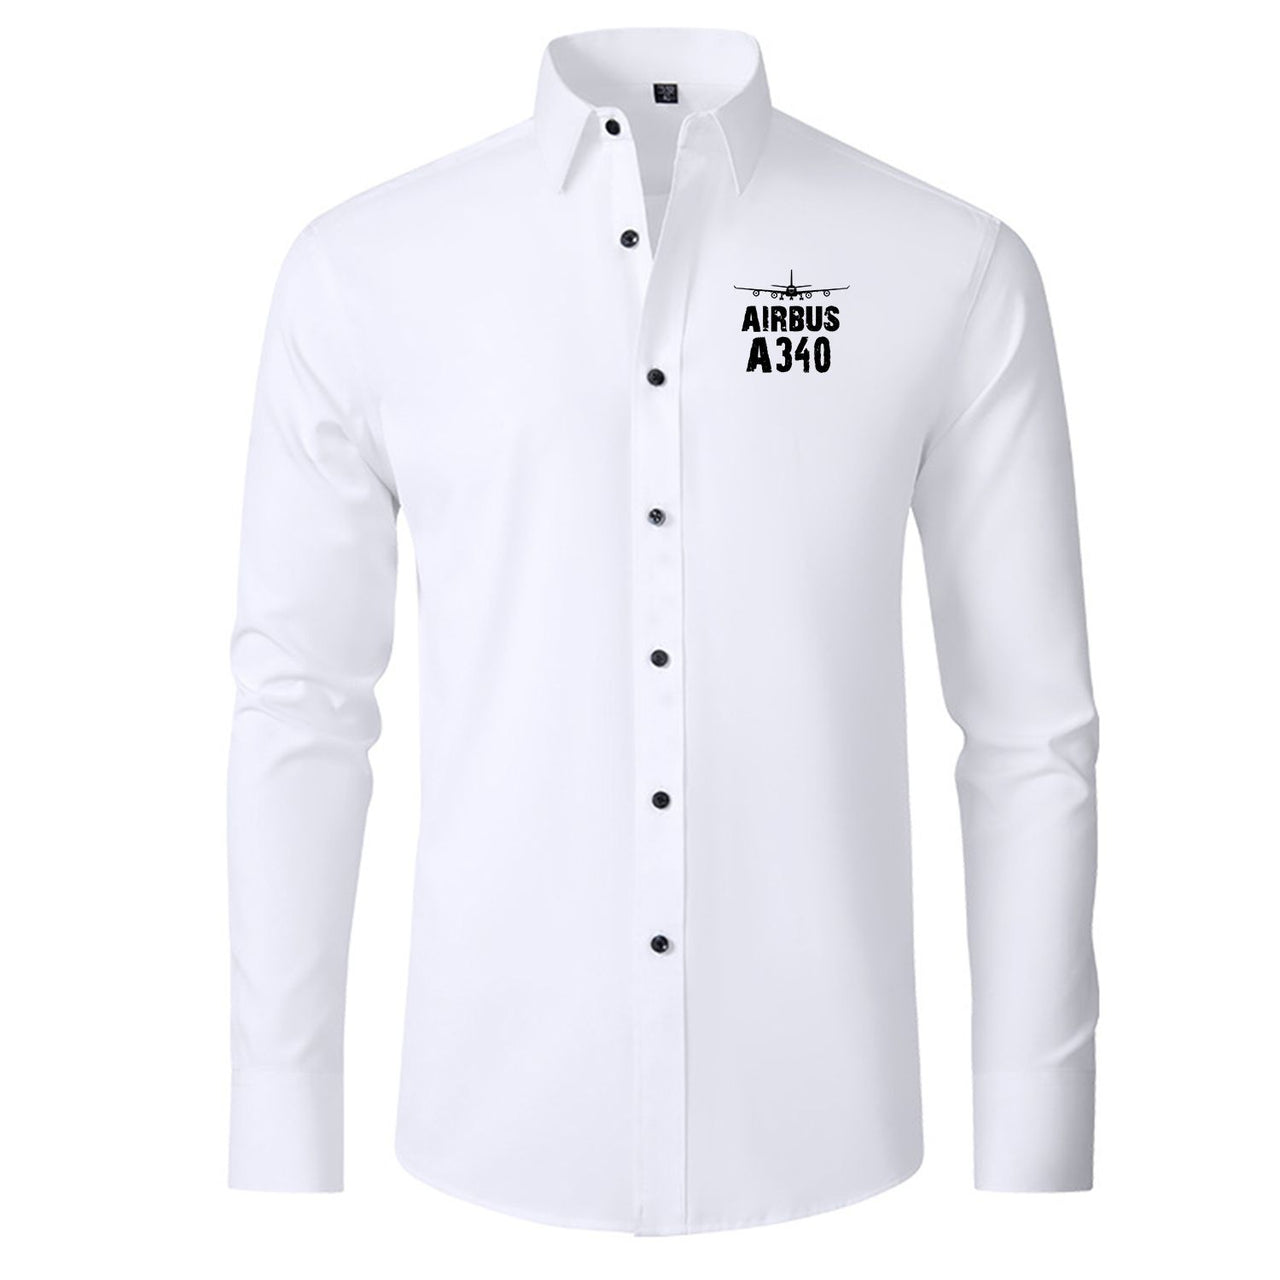 Airbus A340 & Plane Designed Long Sleeve Shirts